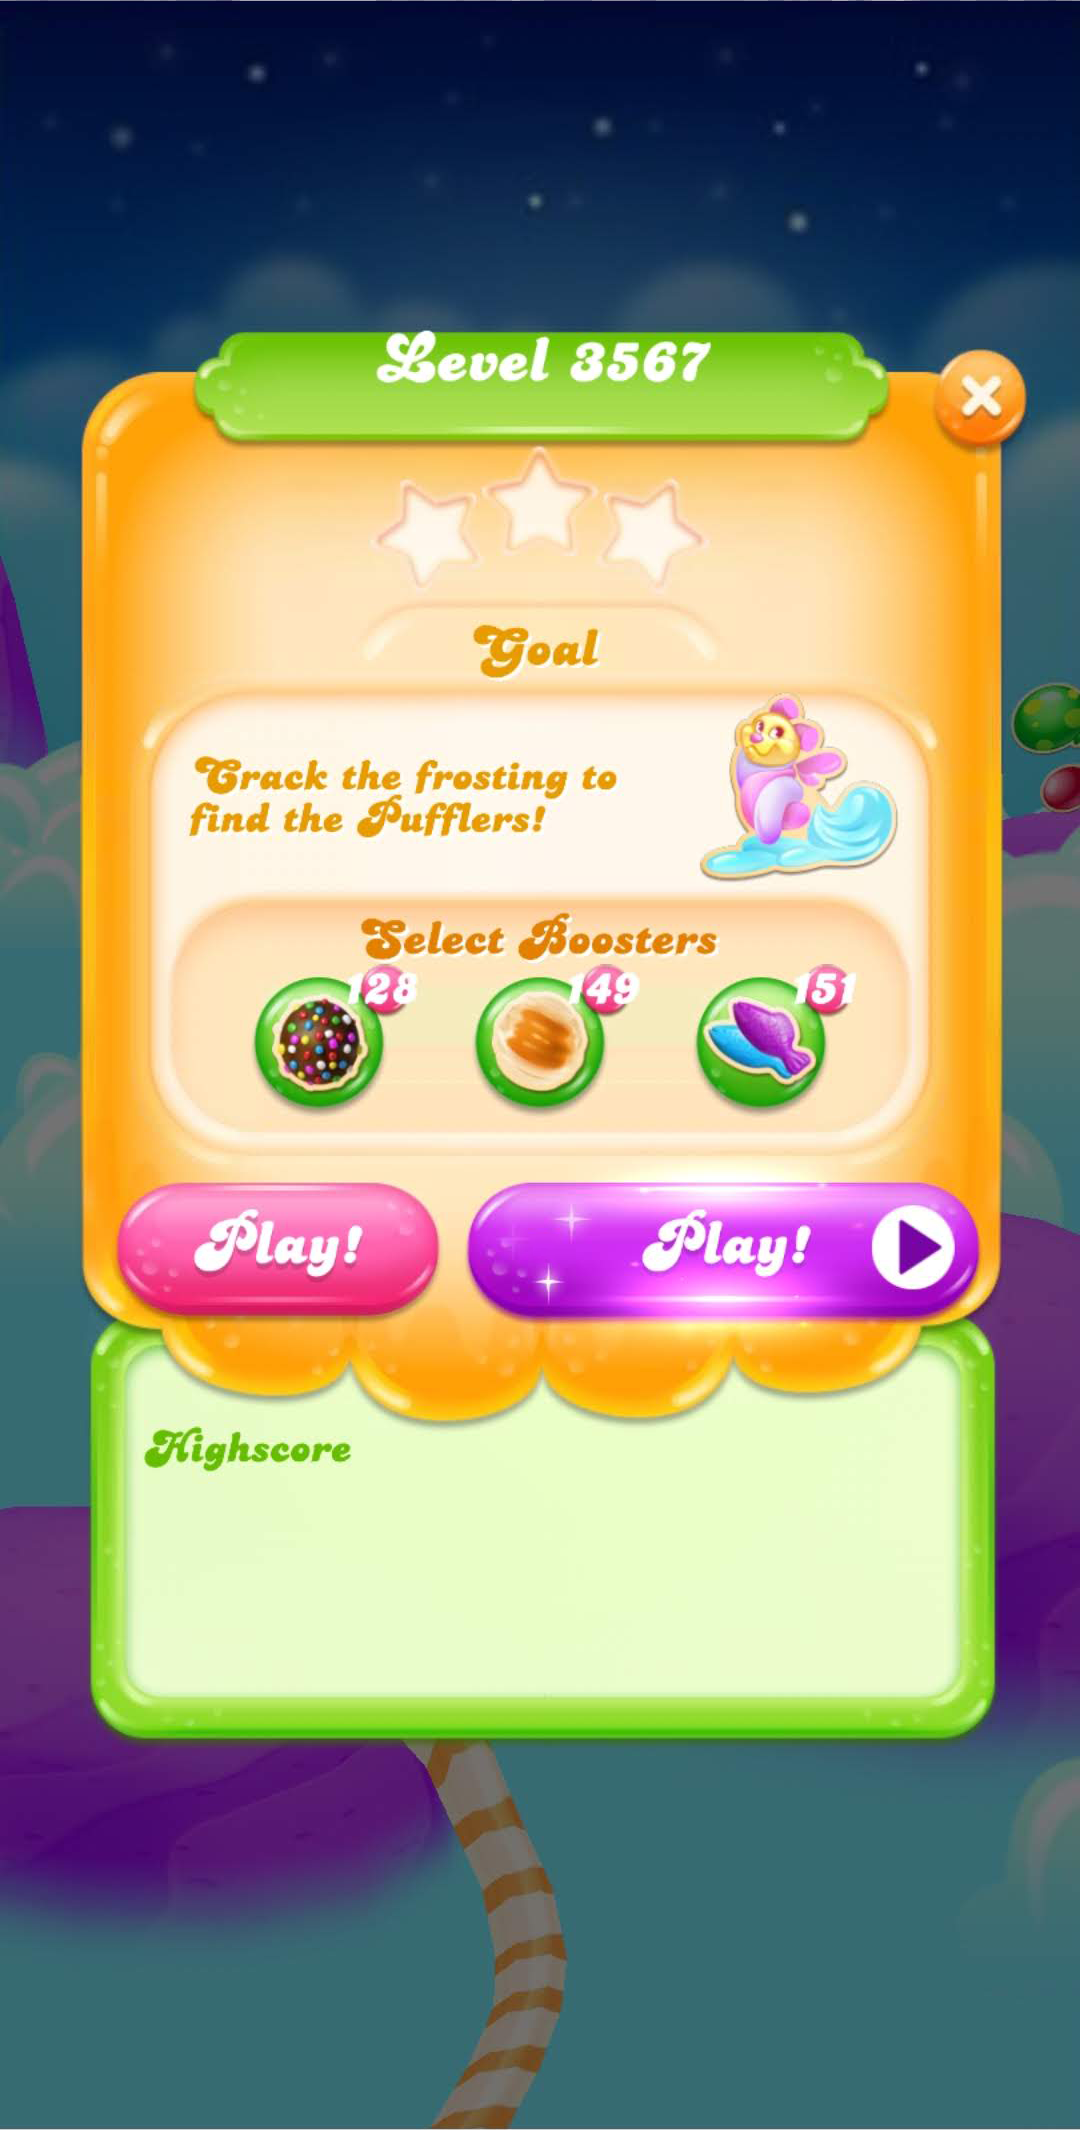 Candy Crush - watch tv show streaming online